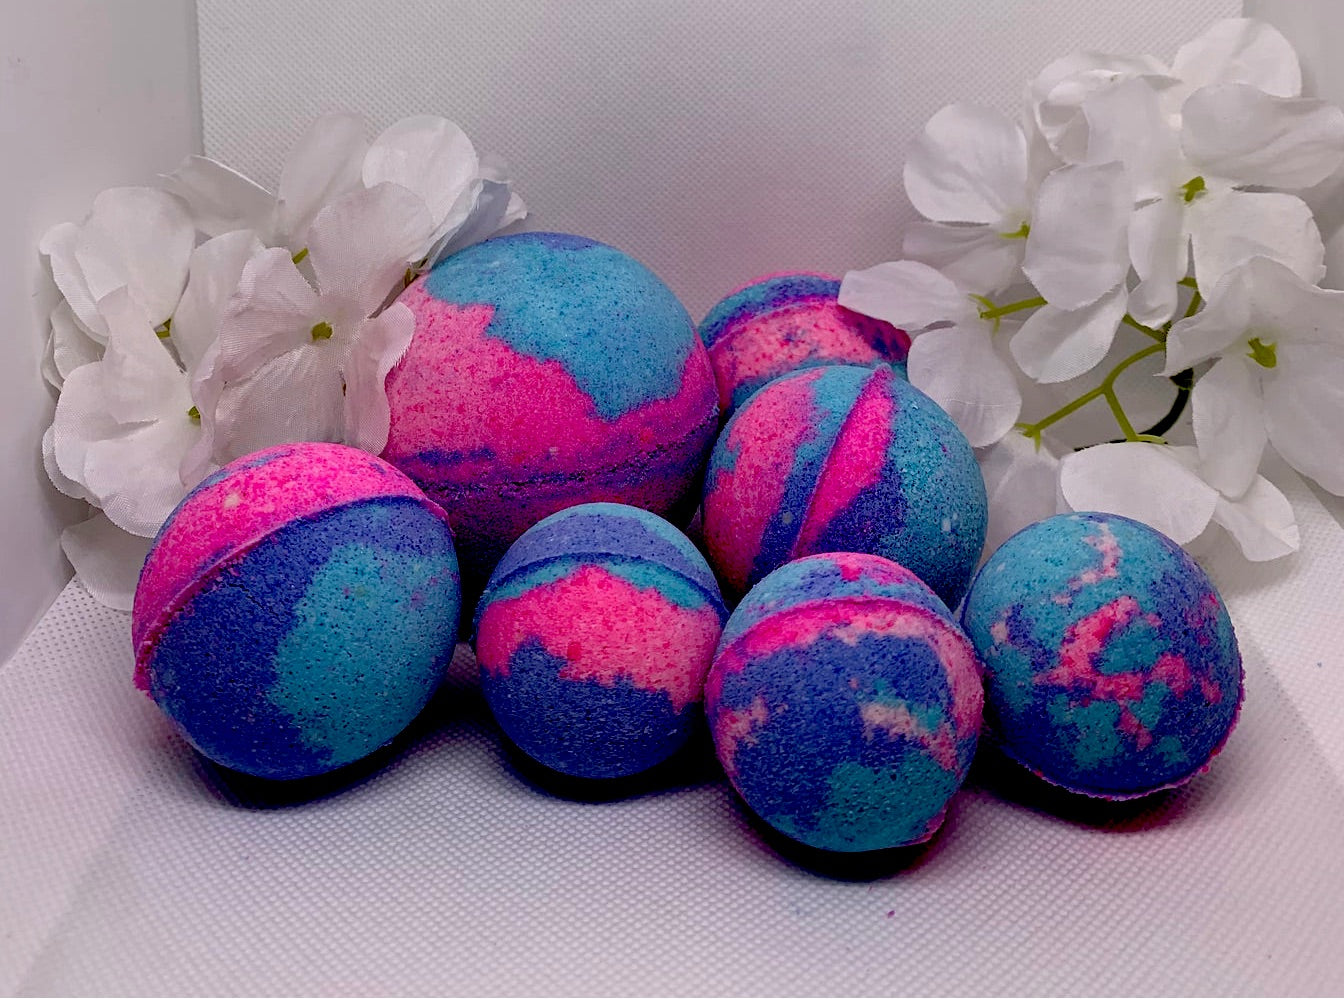 Blue RAZZ Raspberry Pink and Blue Hydrating Scented Bath Bomb!